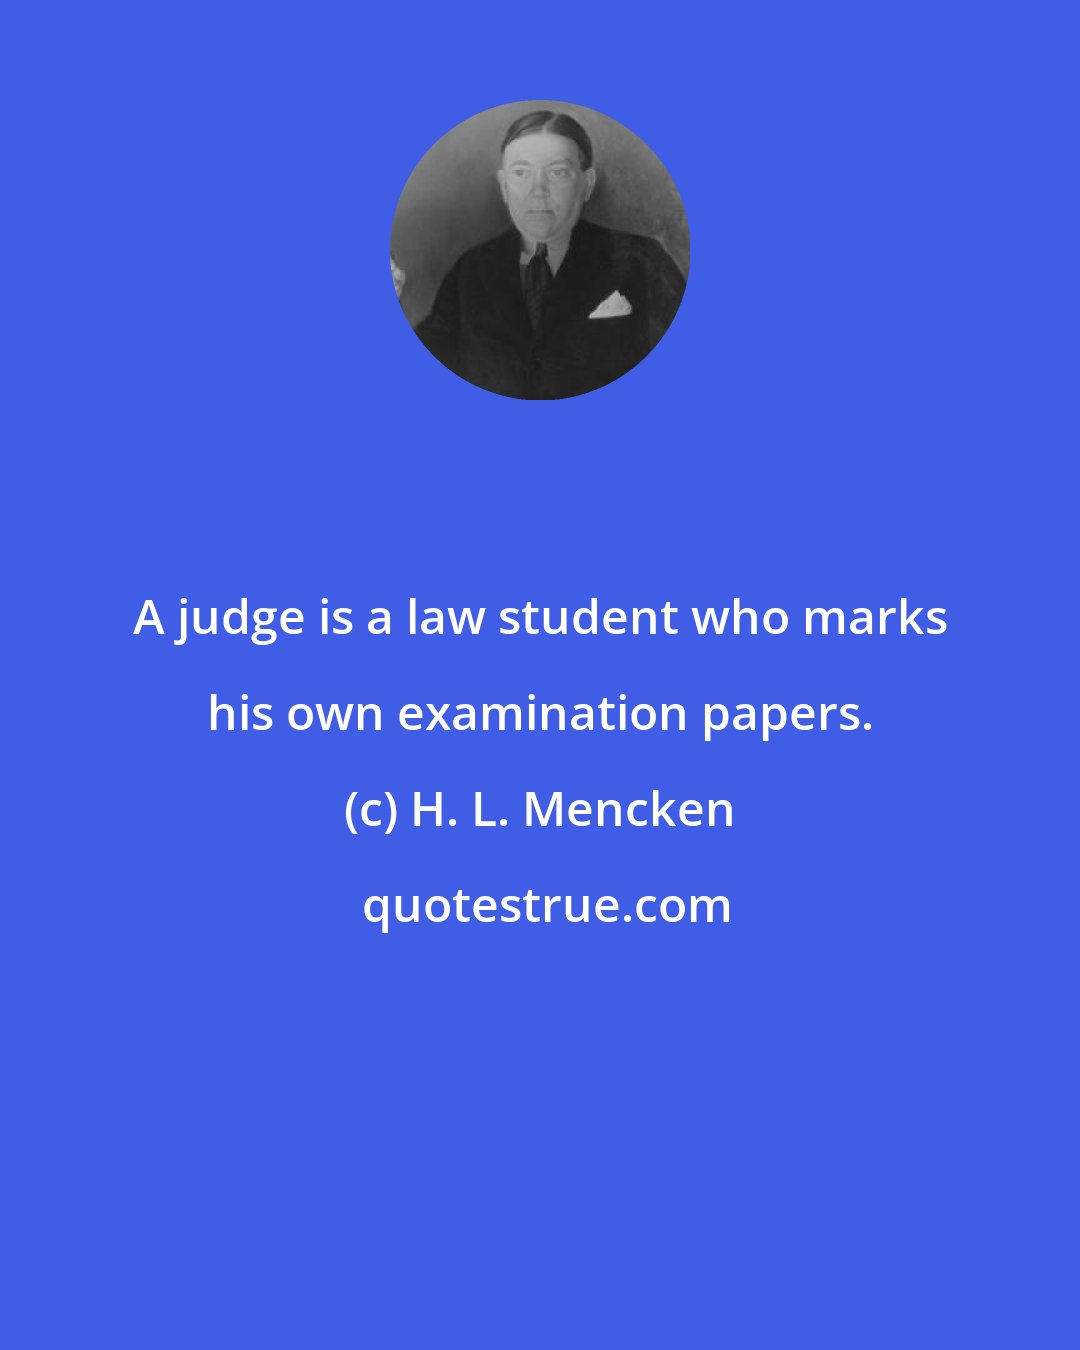 H. L. Mencken: A judge is a law student who marks his own examination papers.